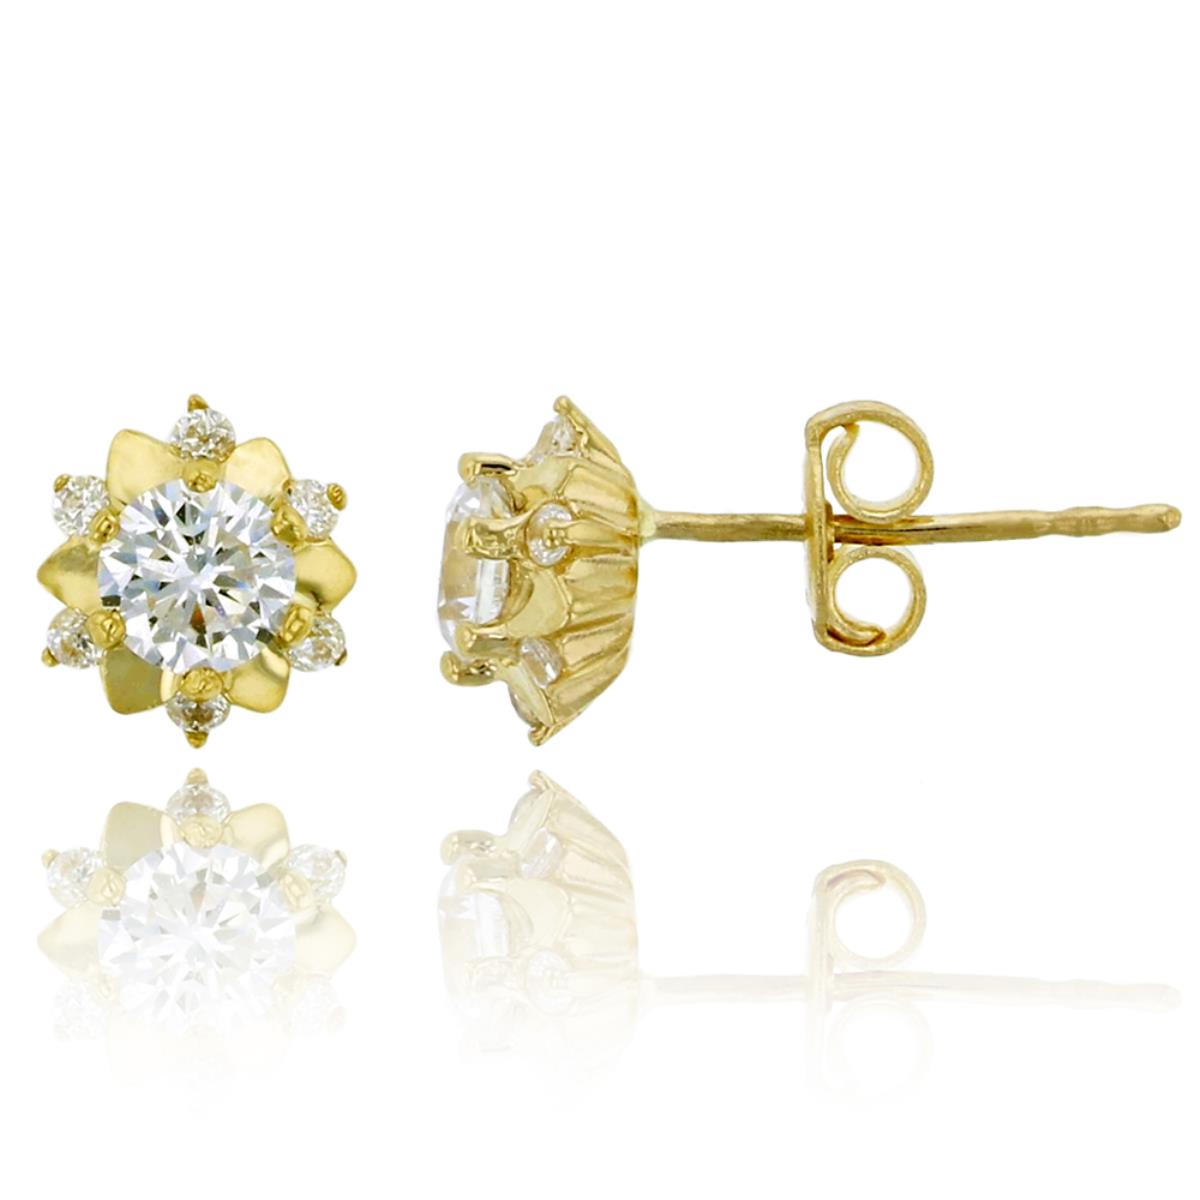 14K Yellow Gold Micropave Round Cut Flower Stud Earrings with Push Backs